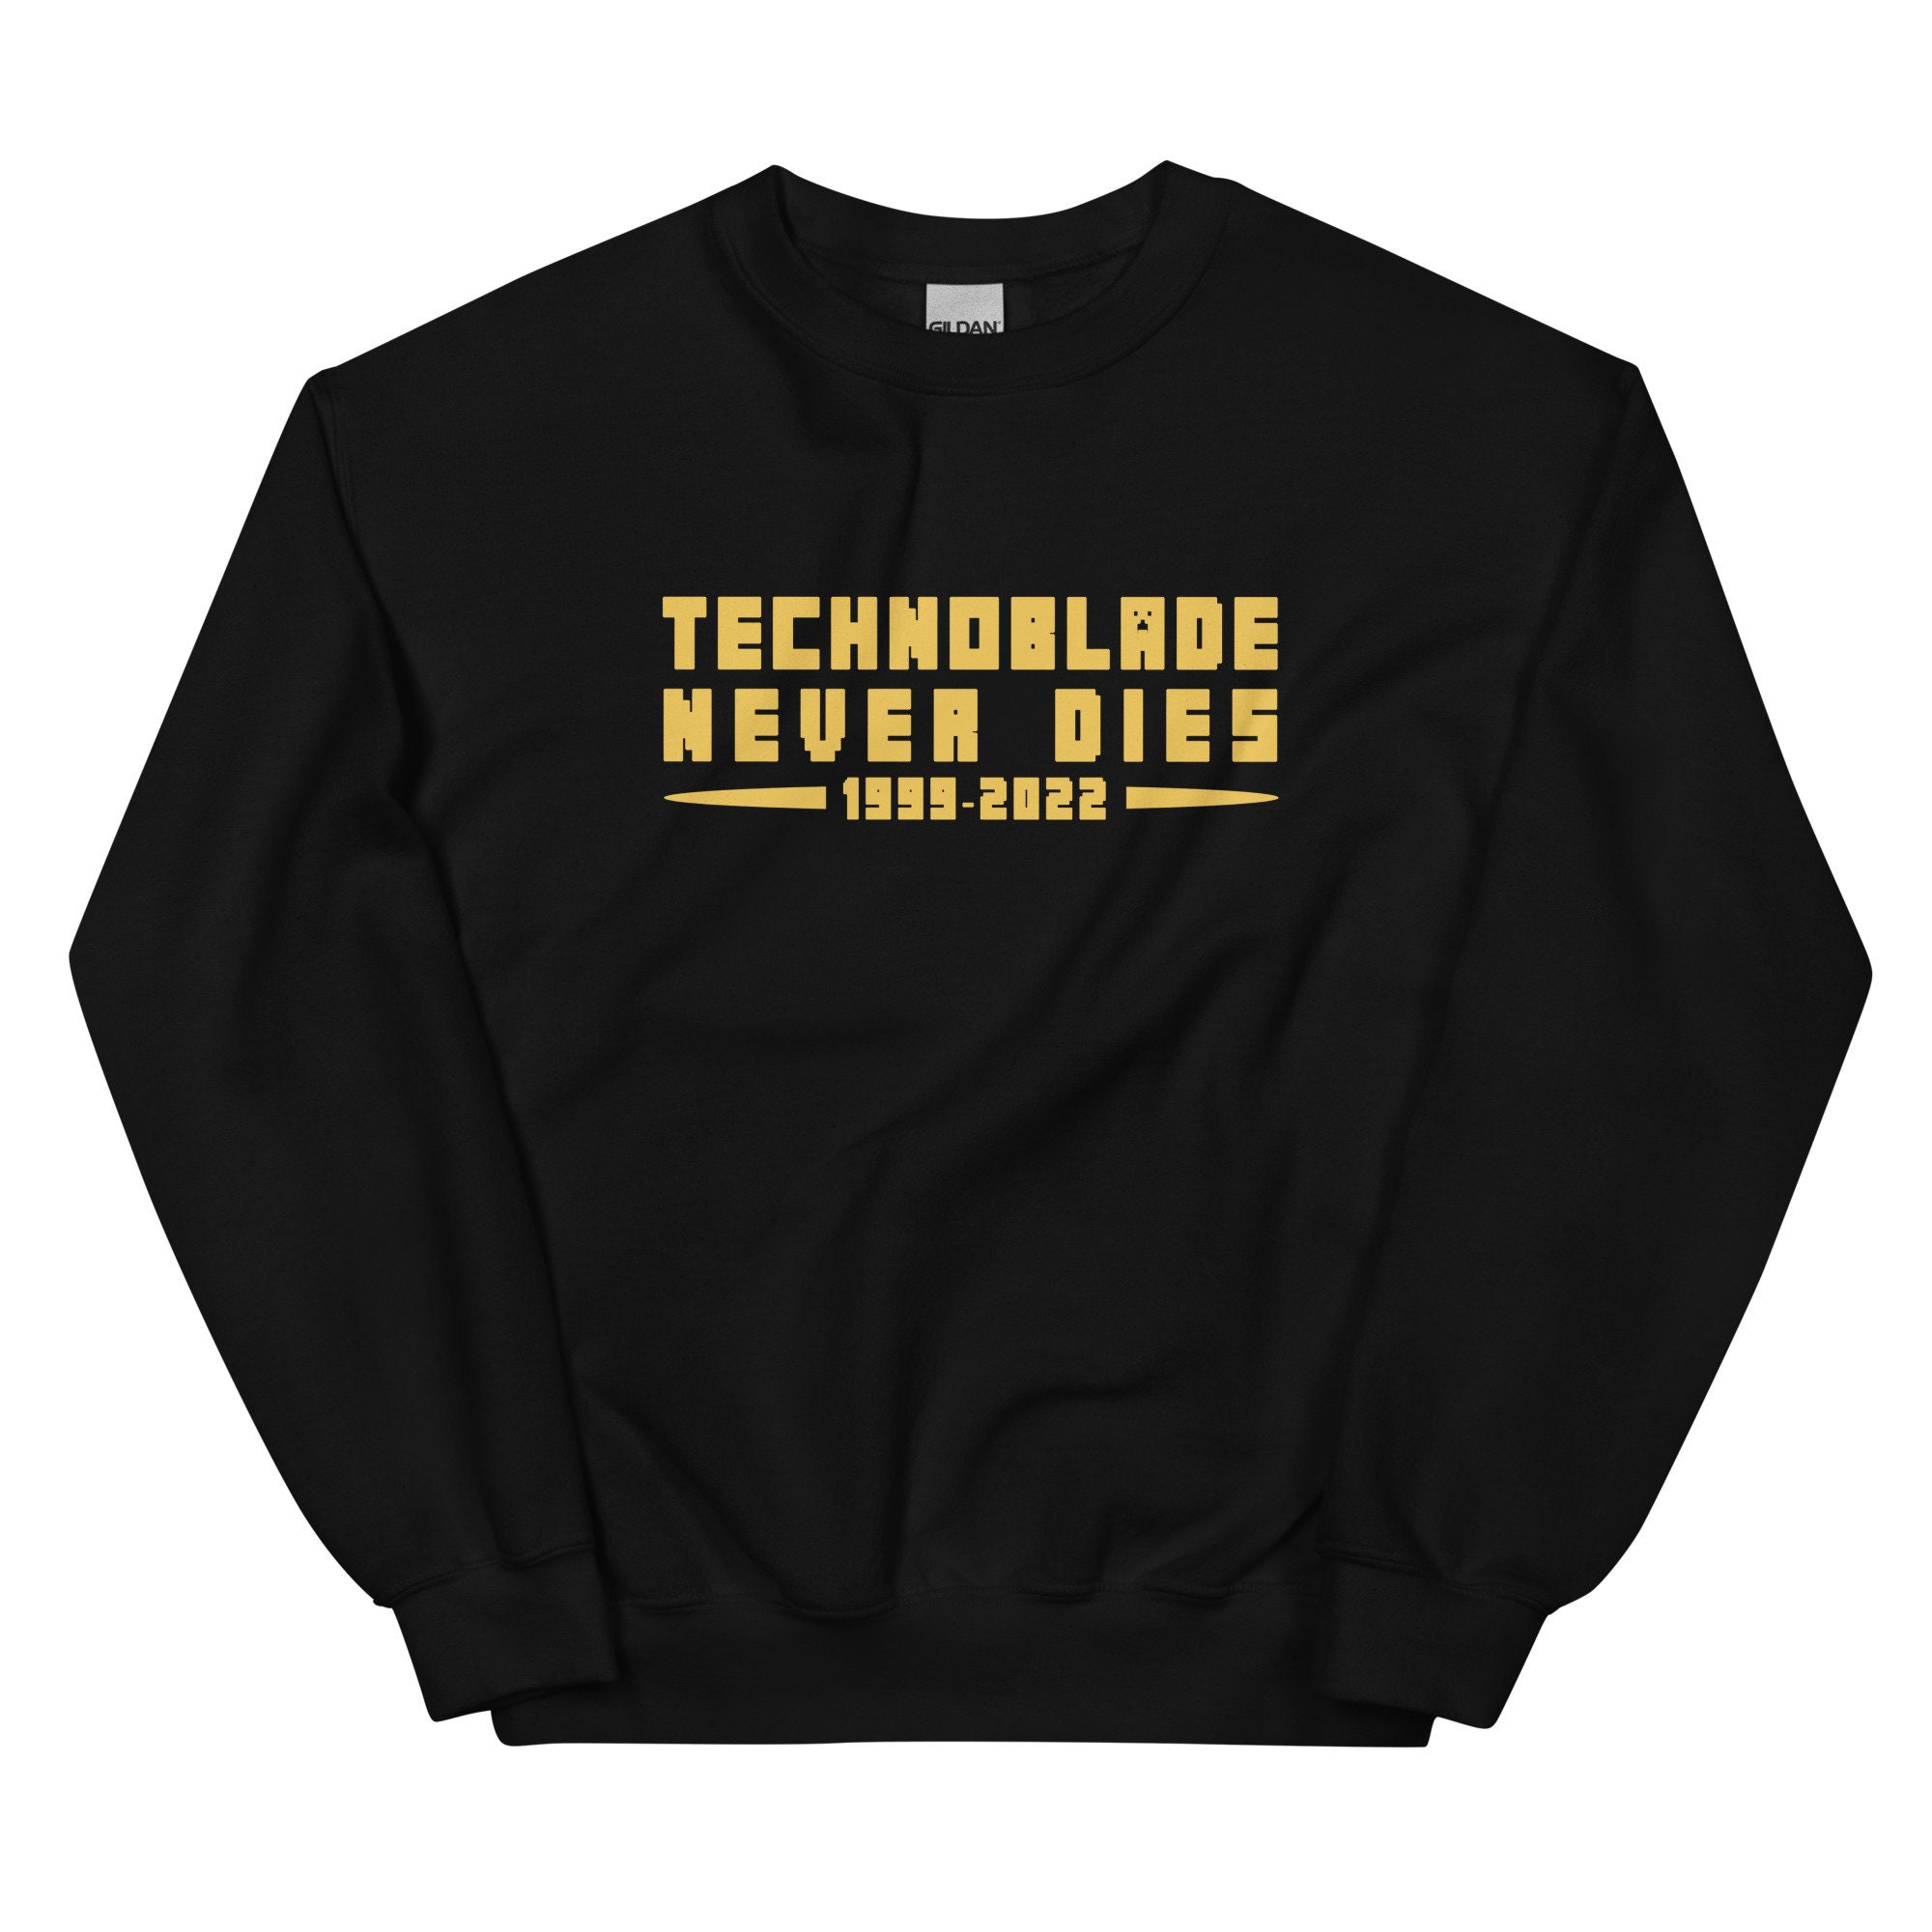 Official Technoblade Never Dies 1999-2022 Shirt, hoodie, sweater